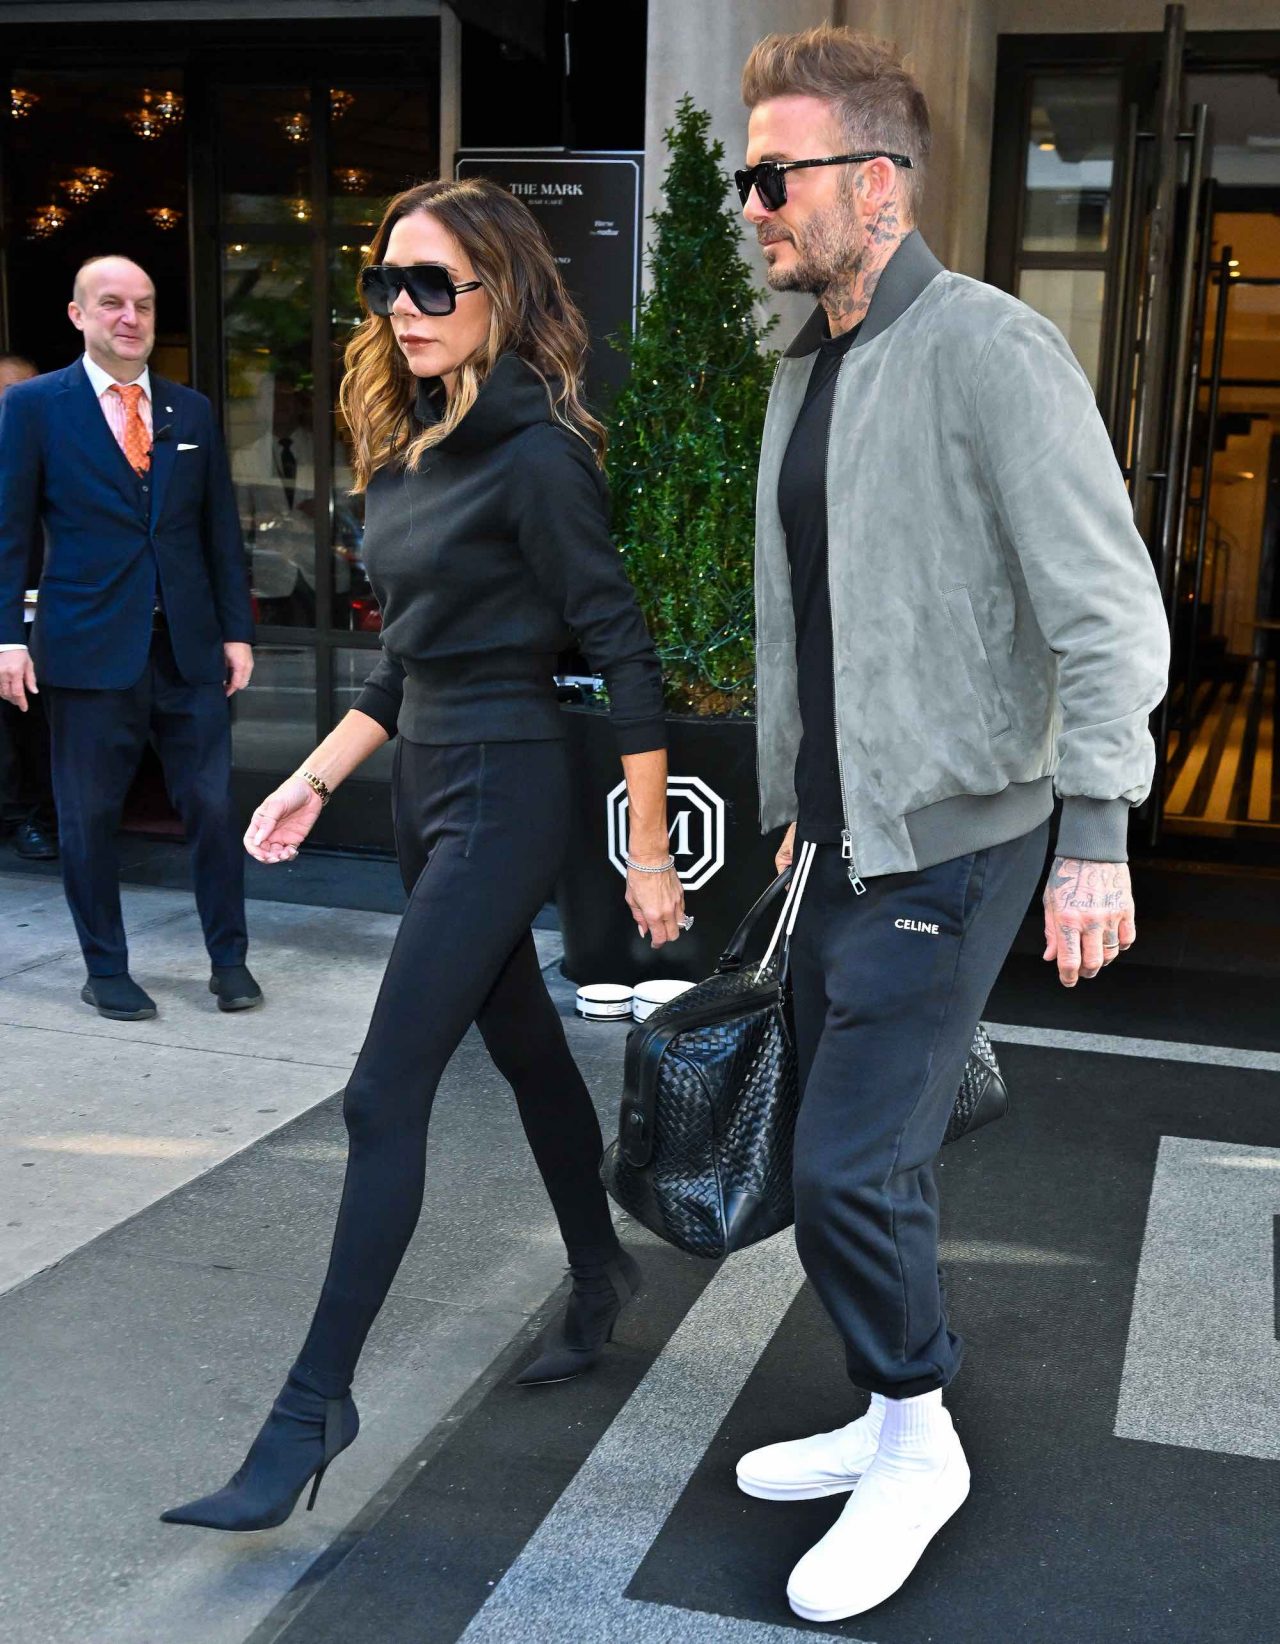 NEW YORK, NEW YORK - OCTOBER 15: Victoria Beckham and David Beckham are seen on the Upper East Side on October 15, 2022 in New York City. (Photo by James Devaney/GC Images)